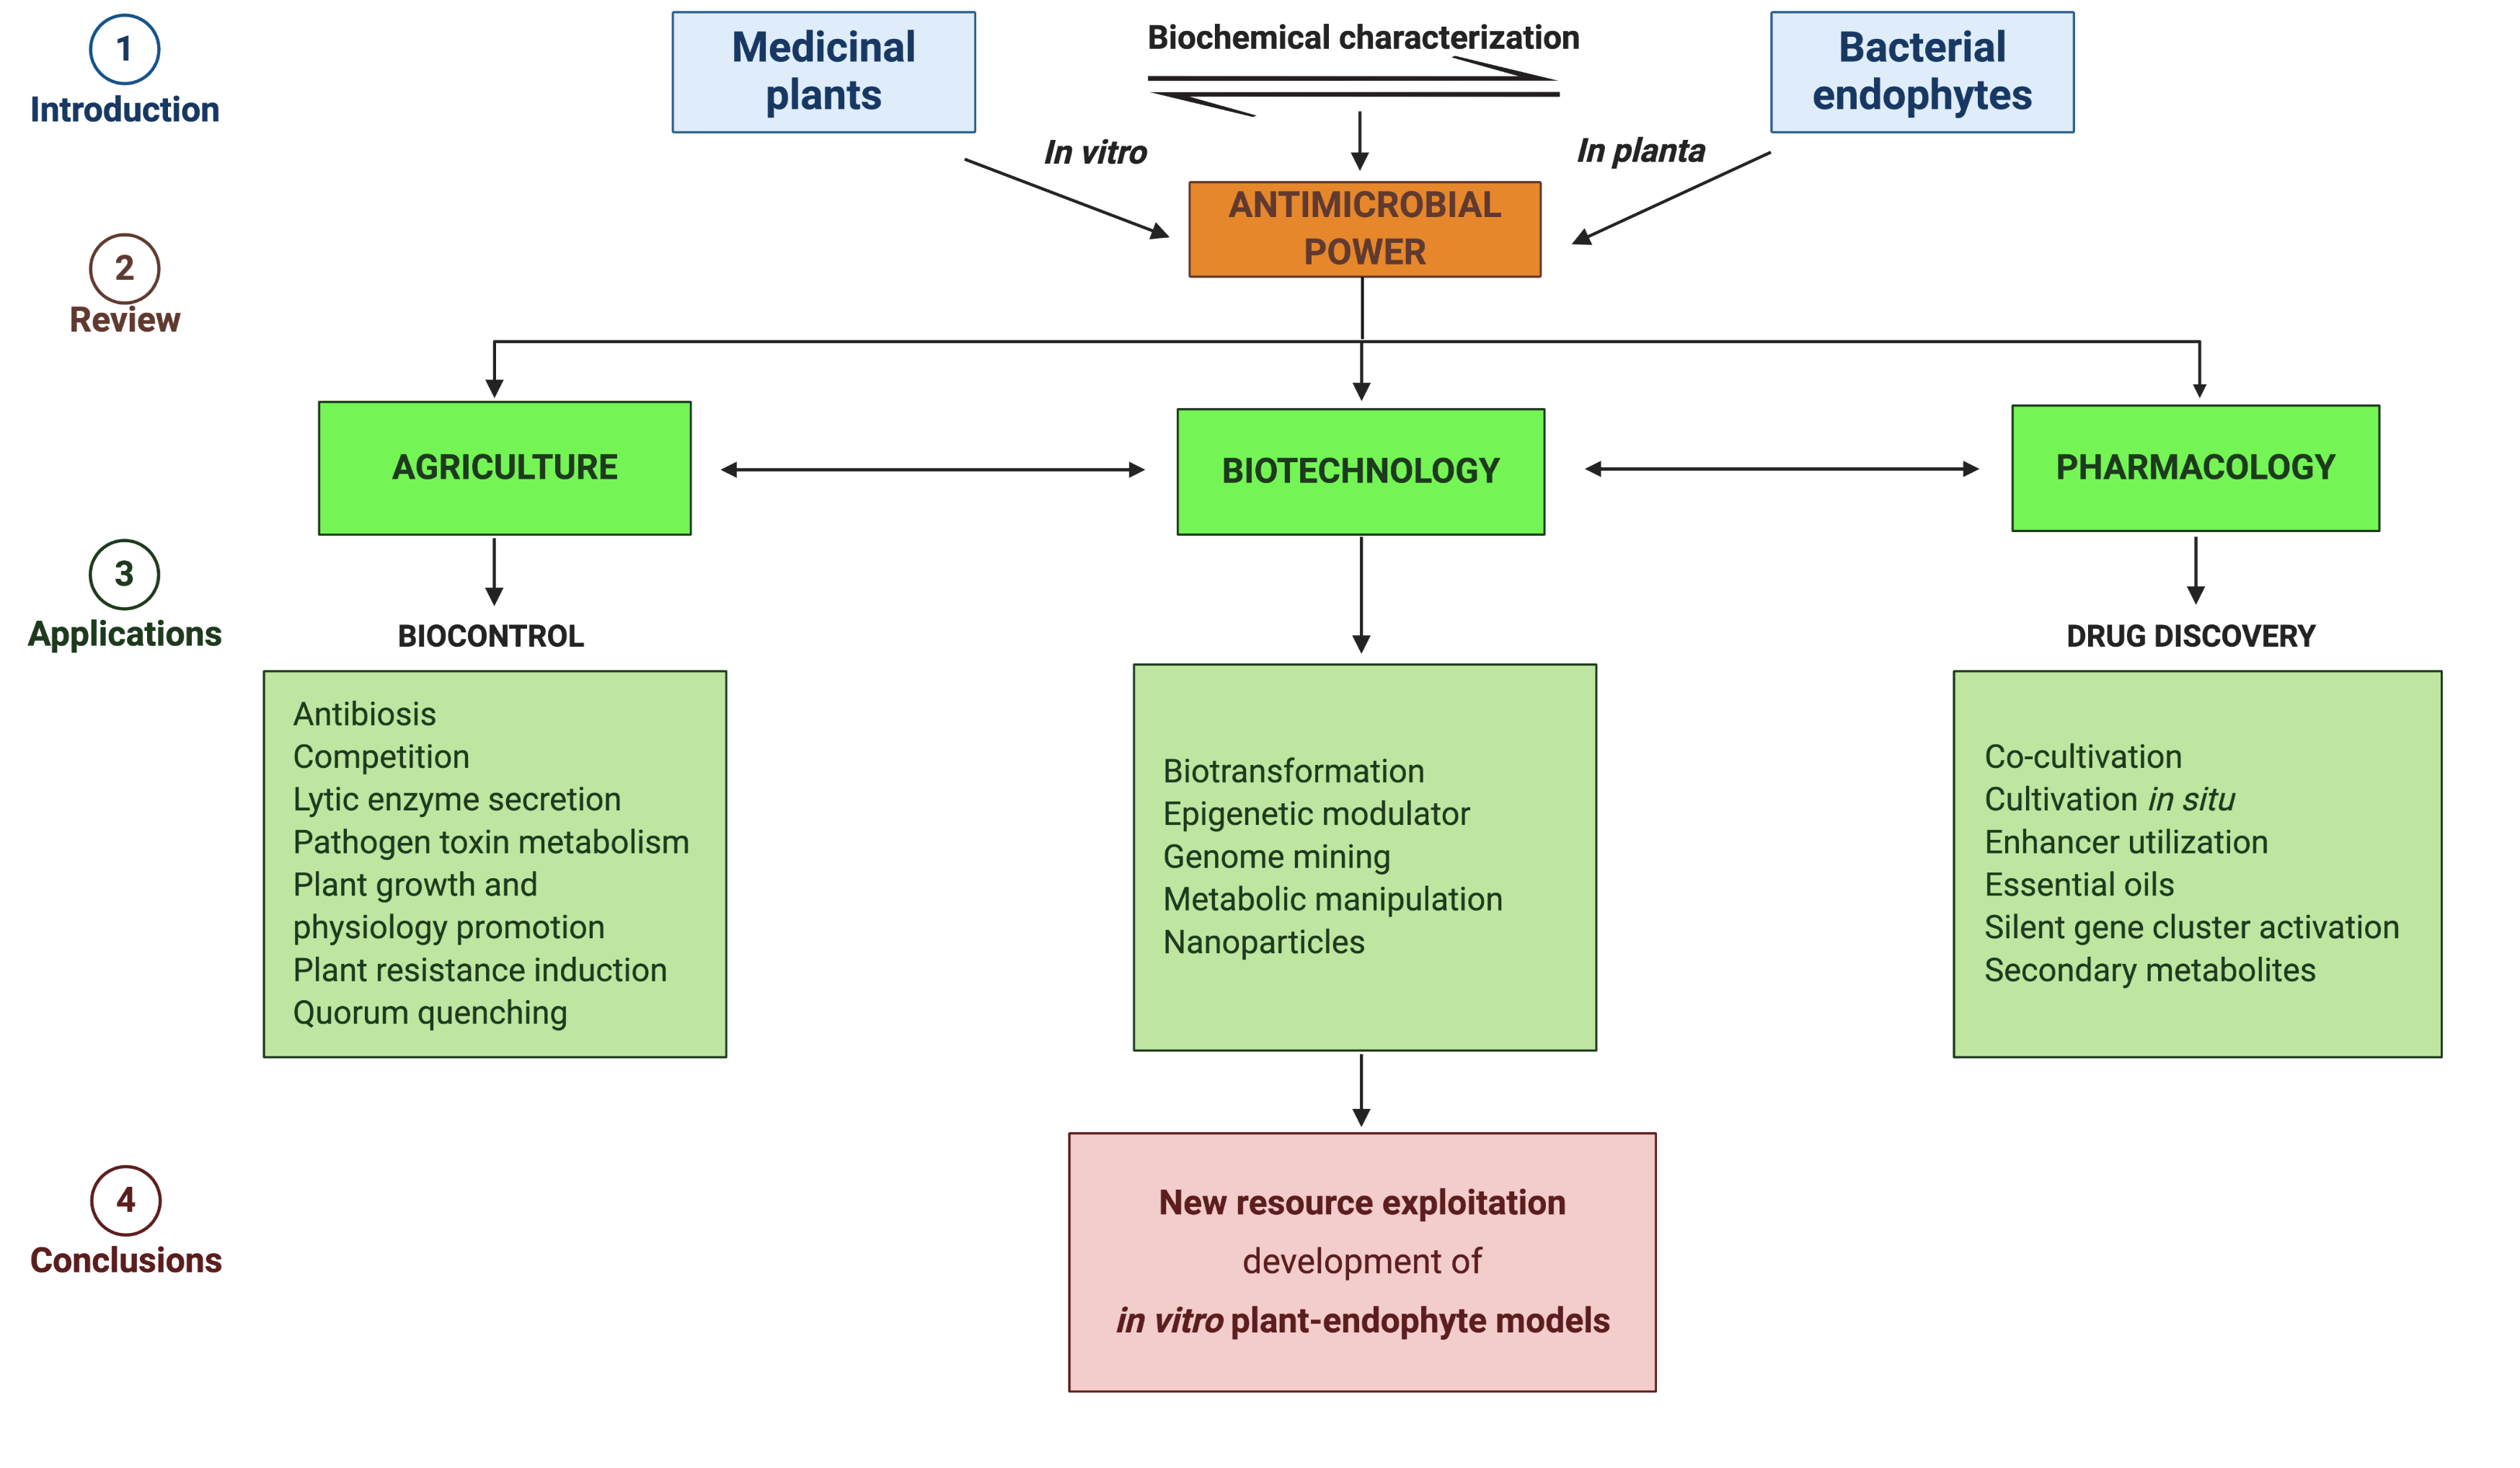 Pathogens | Free Full-Text | Medicinal Plants and Their Bacterial Microbiota: Review on Antimicrobial Compounds Production for and Human Health